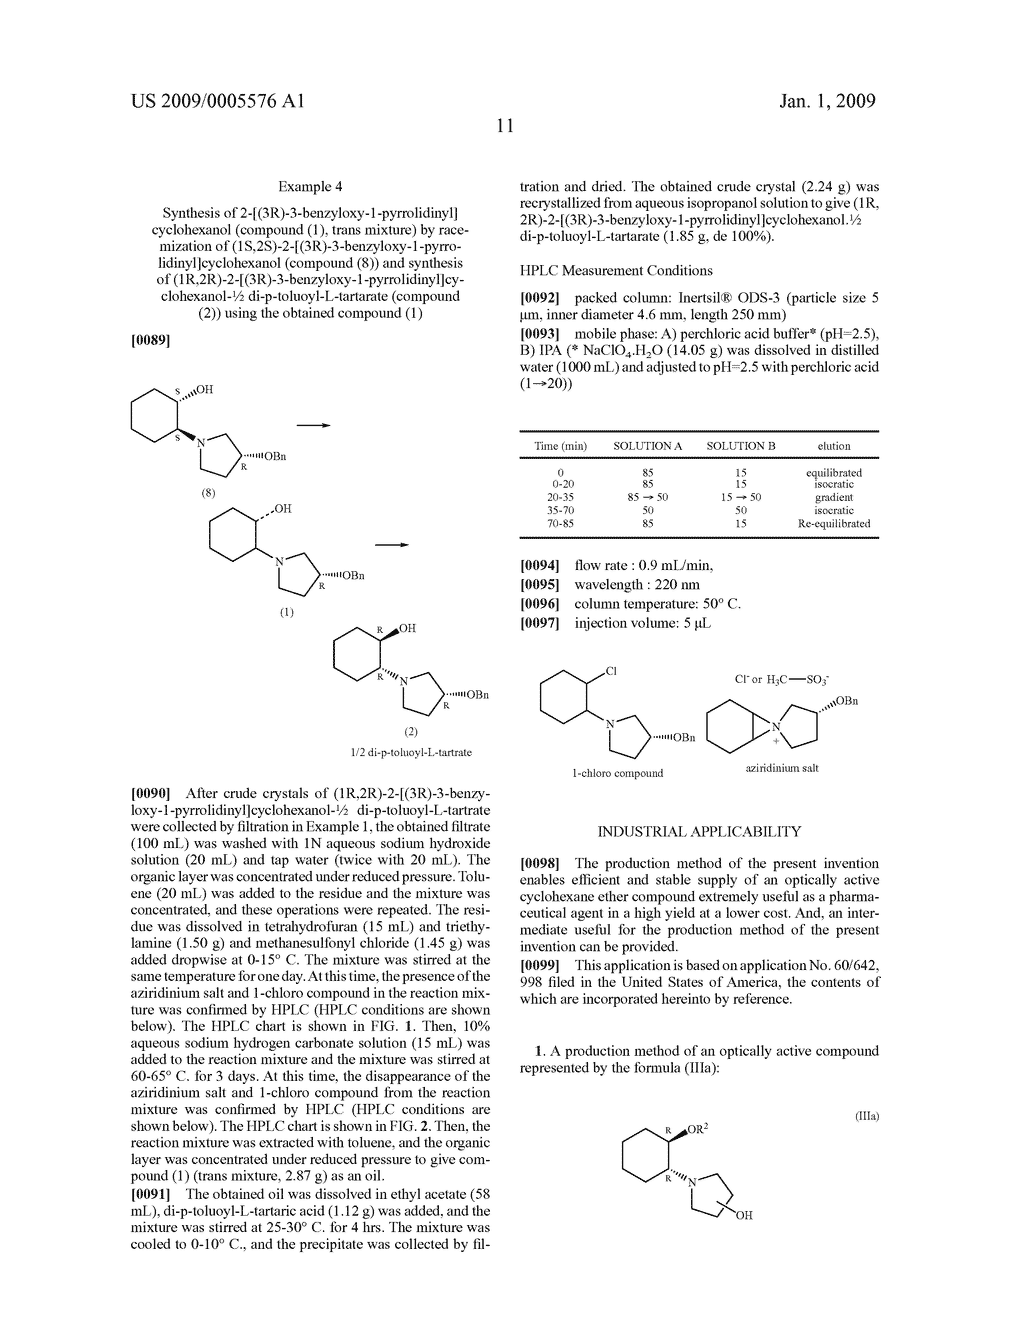 Production Method of Optically Active Cyclohexane Ether Compounds - diagram, schematic, and image 14